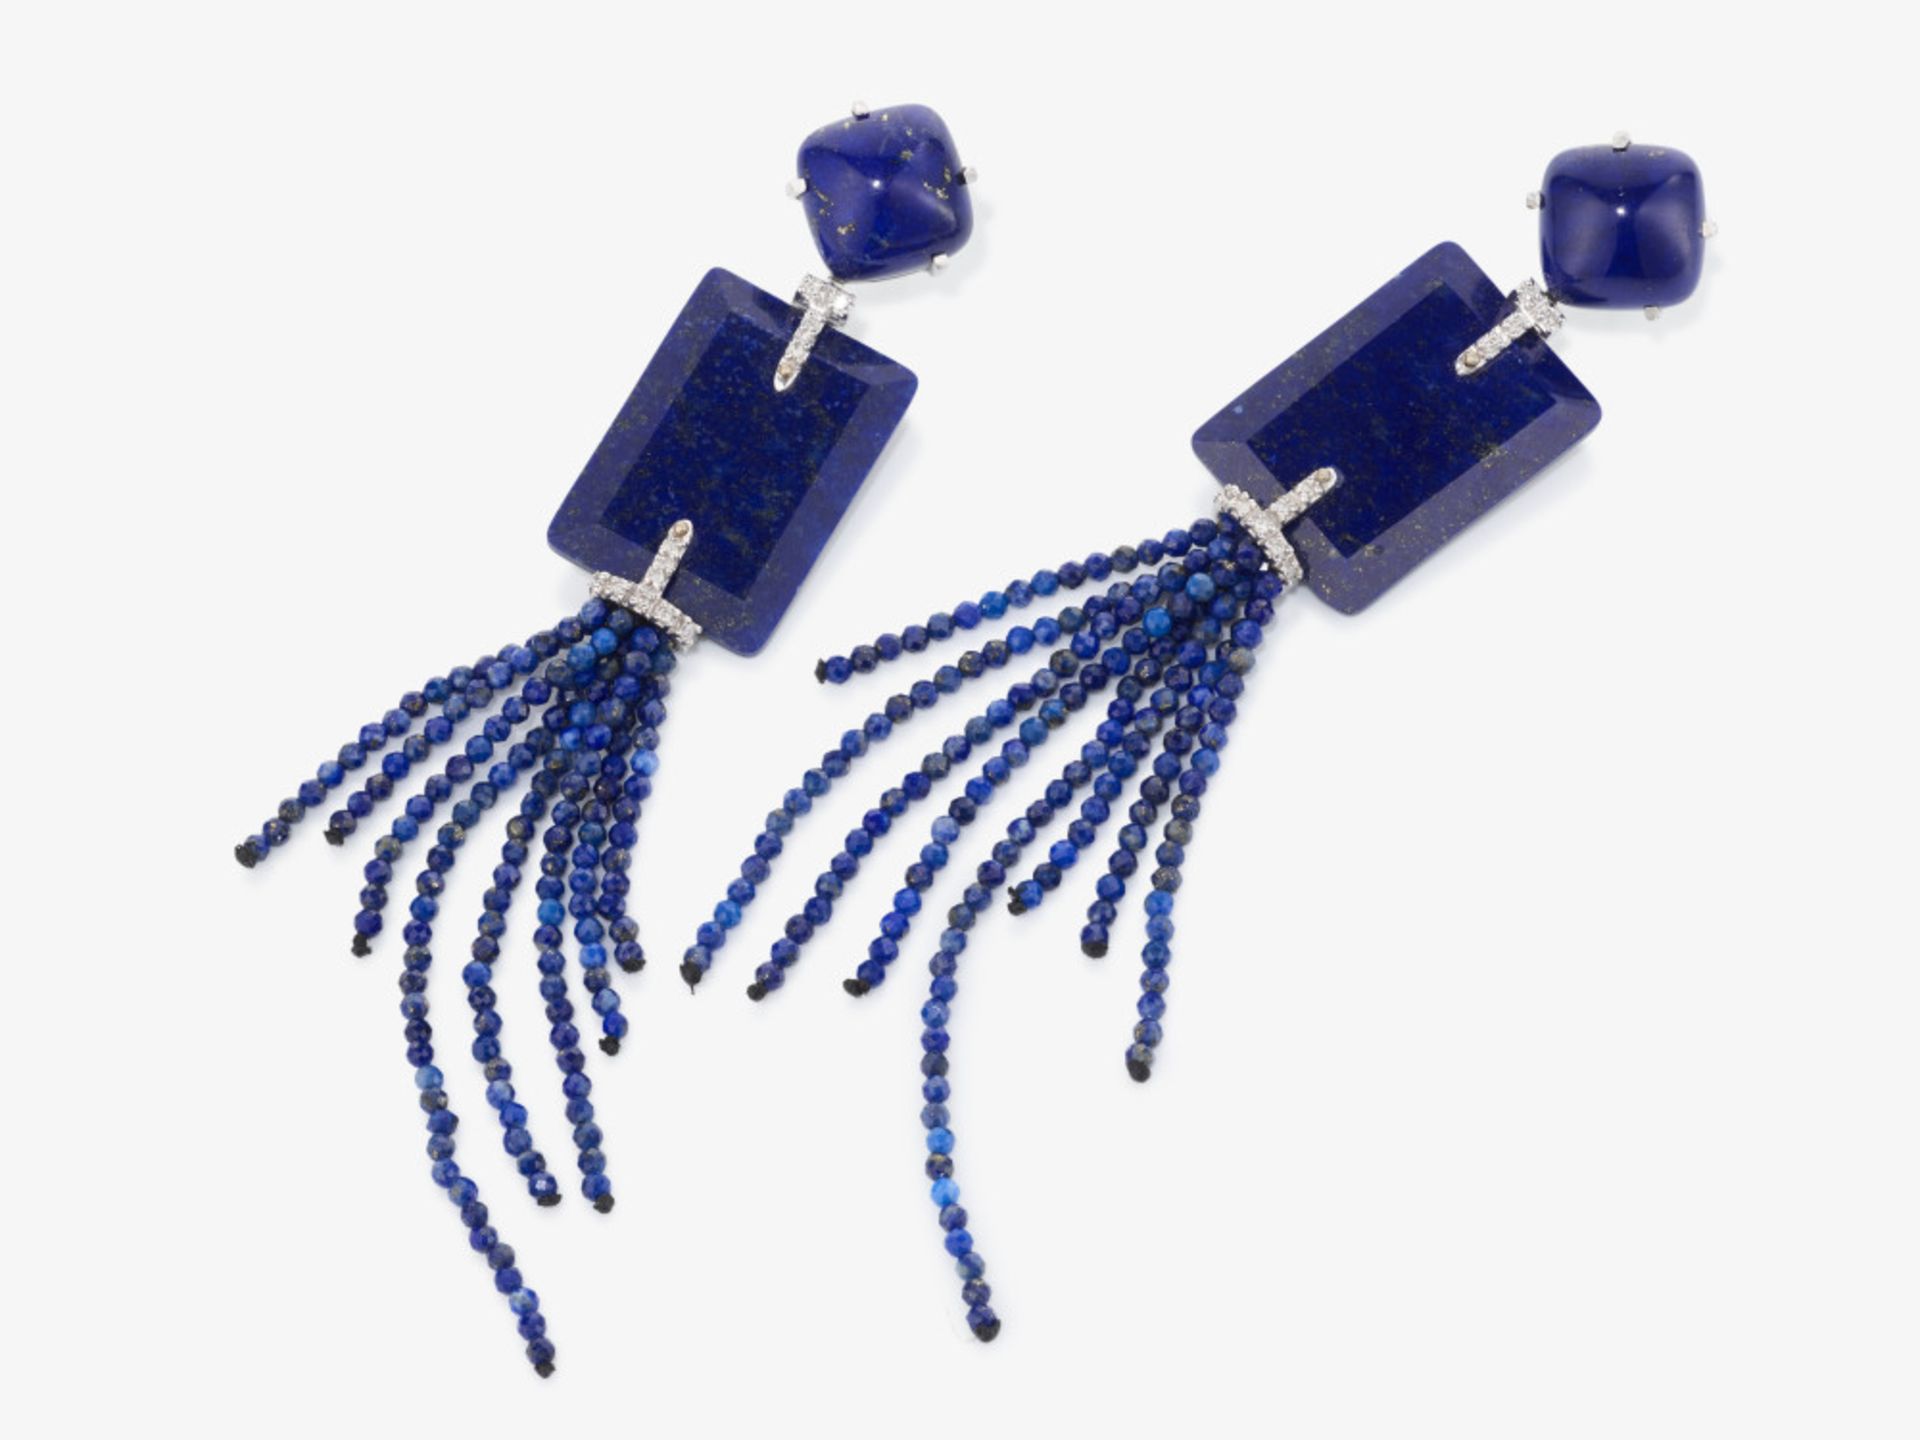 A pair of expressive stud earrings decorated with lapis lazuli and brilliant-cut diamonds